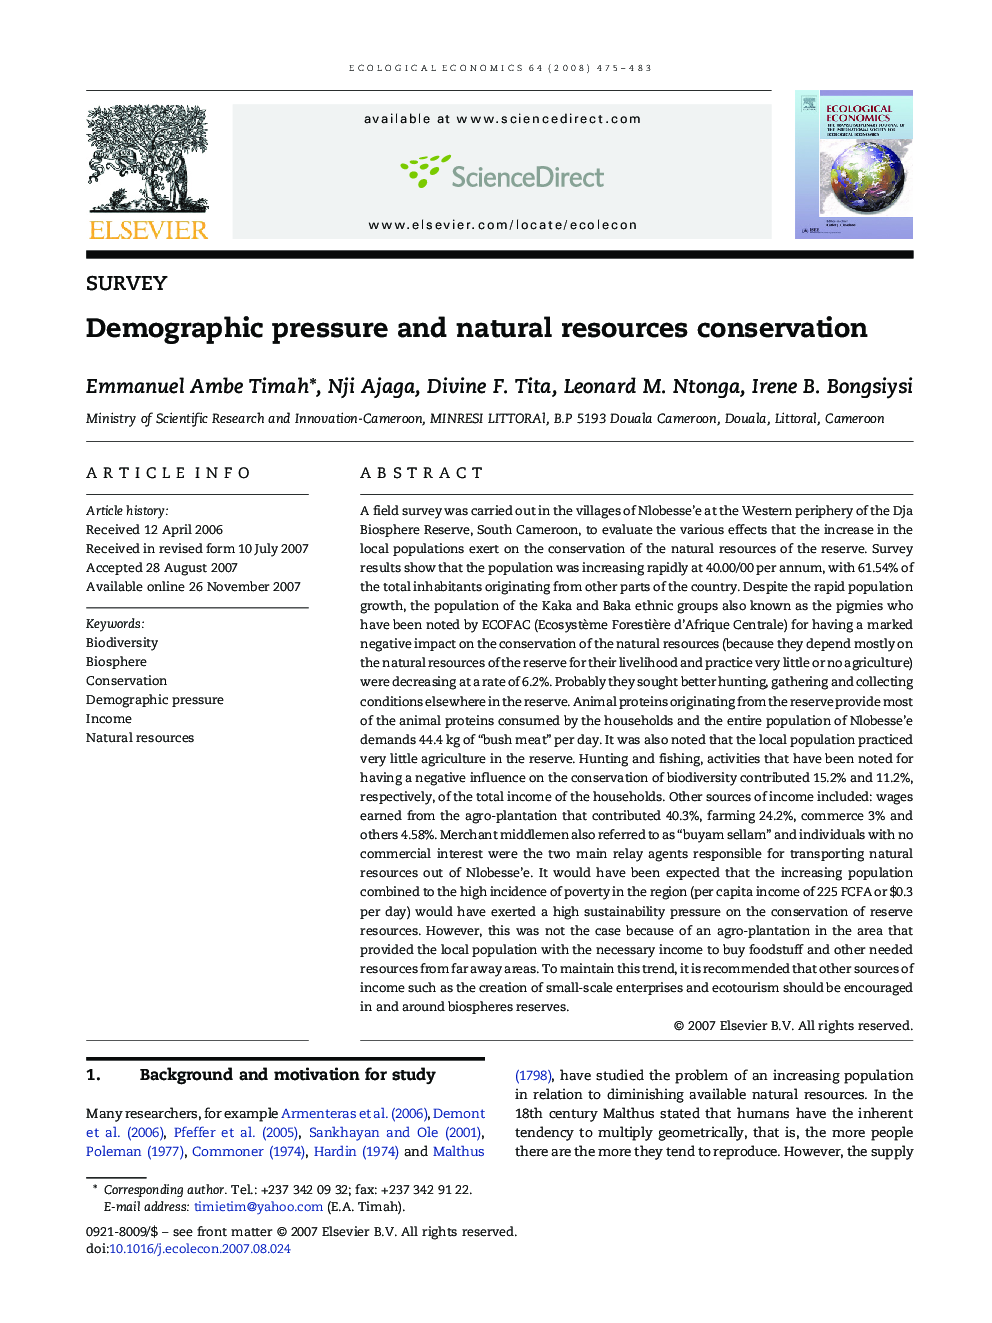 Demographic pressure and natural resources conservation